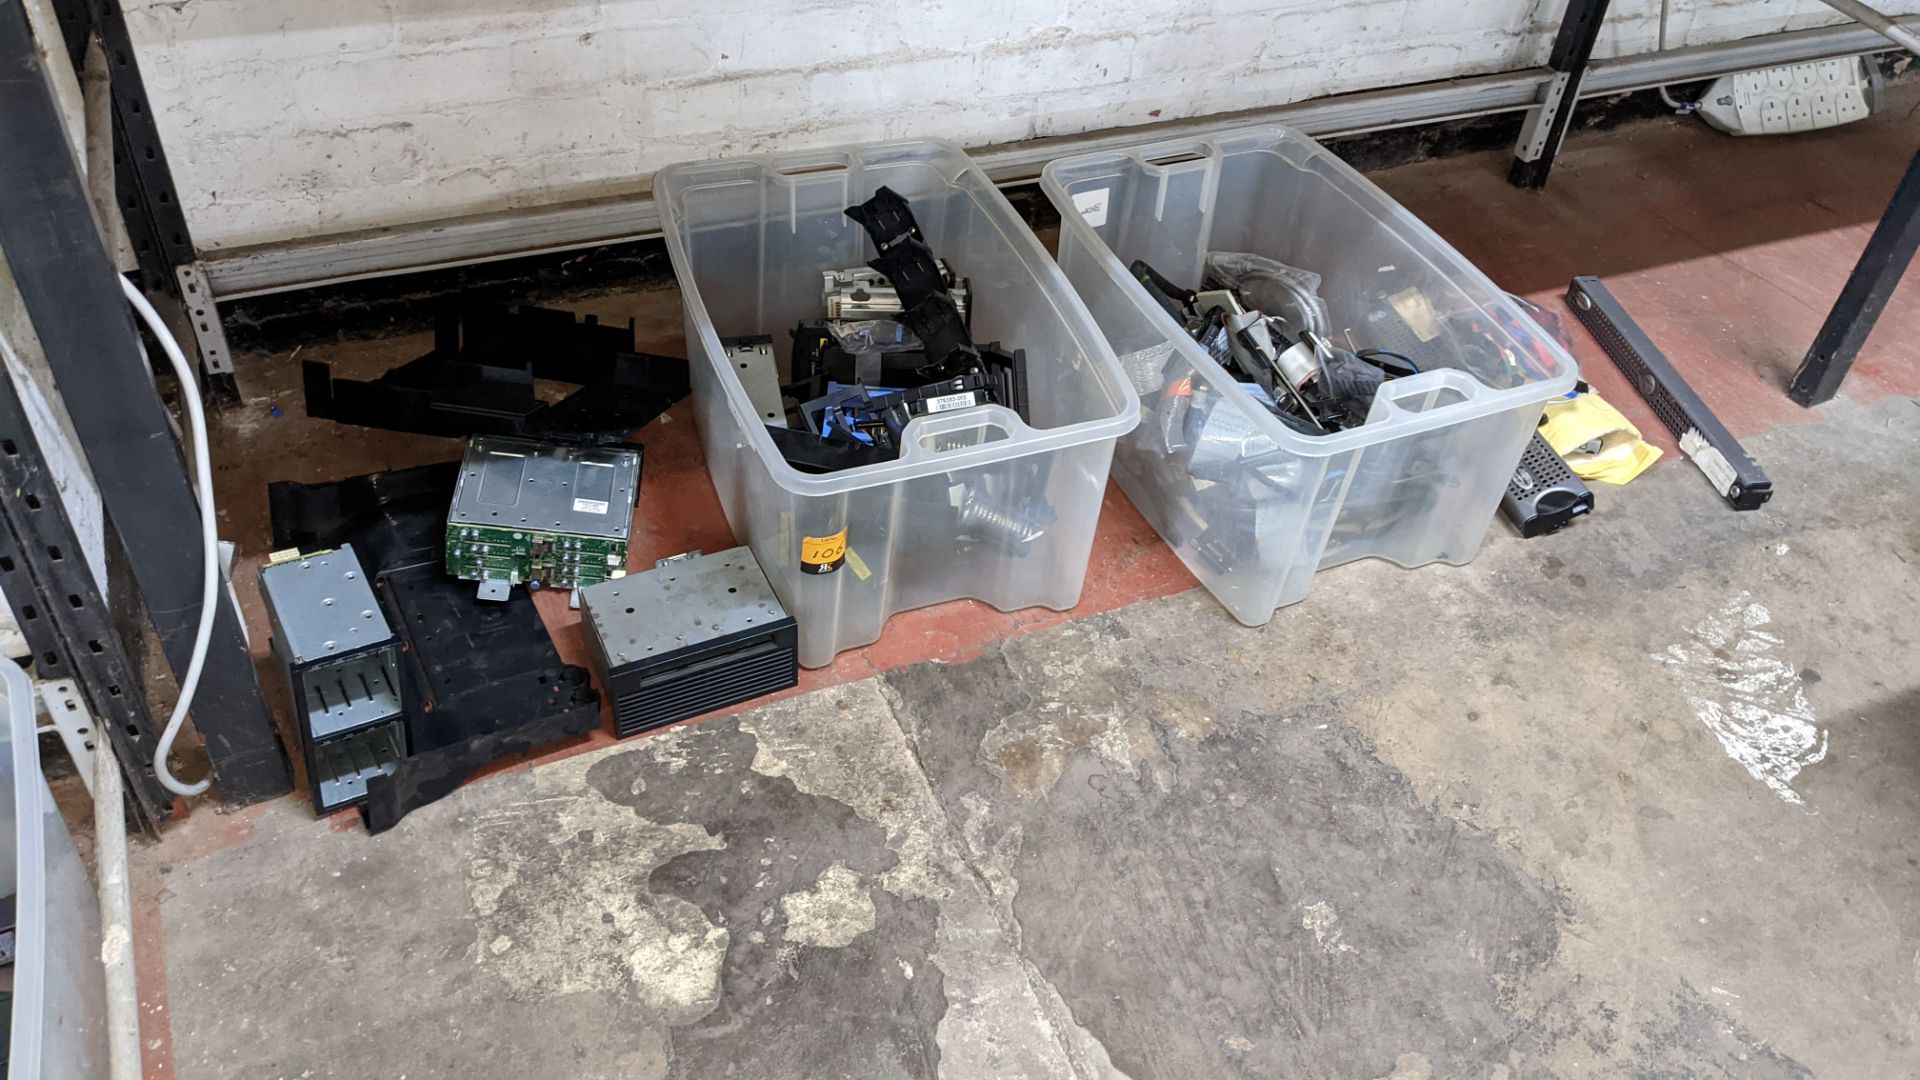 Contents of 2 crates of assorted cables & parts as pictured - crates excluded - Image 11 of 11